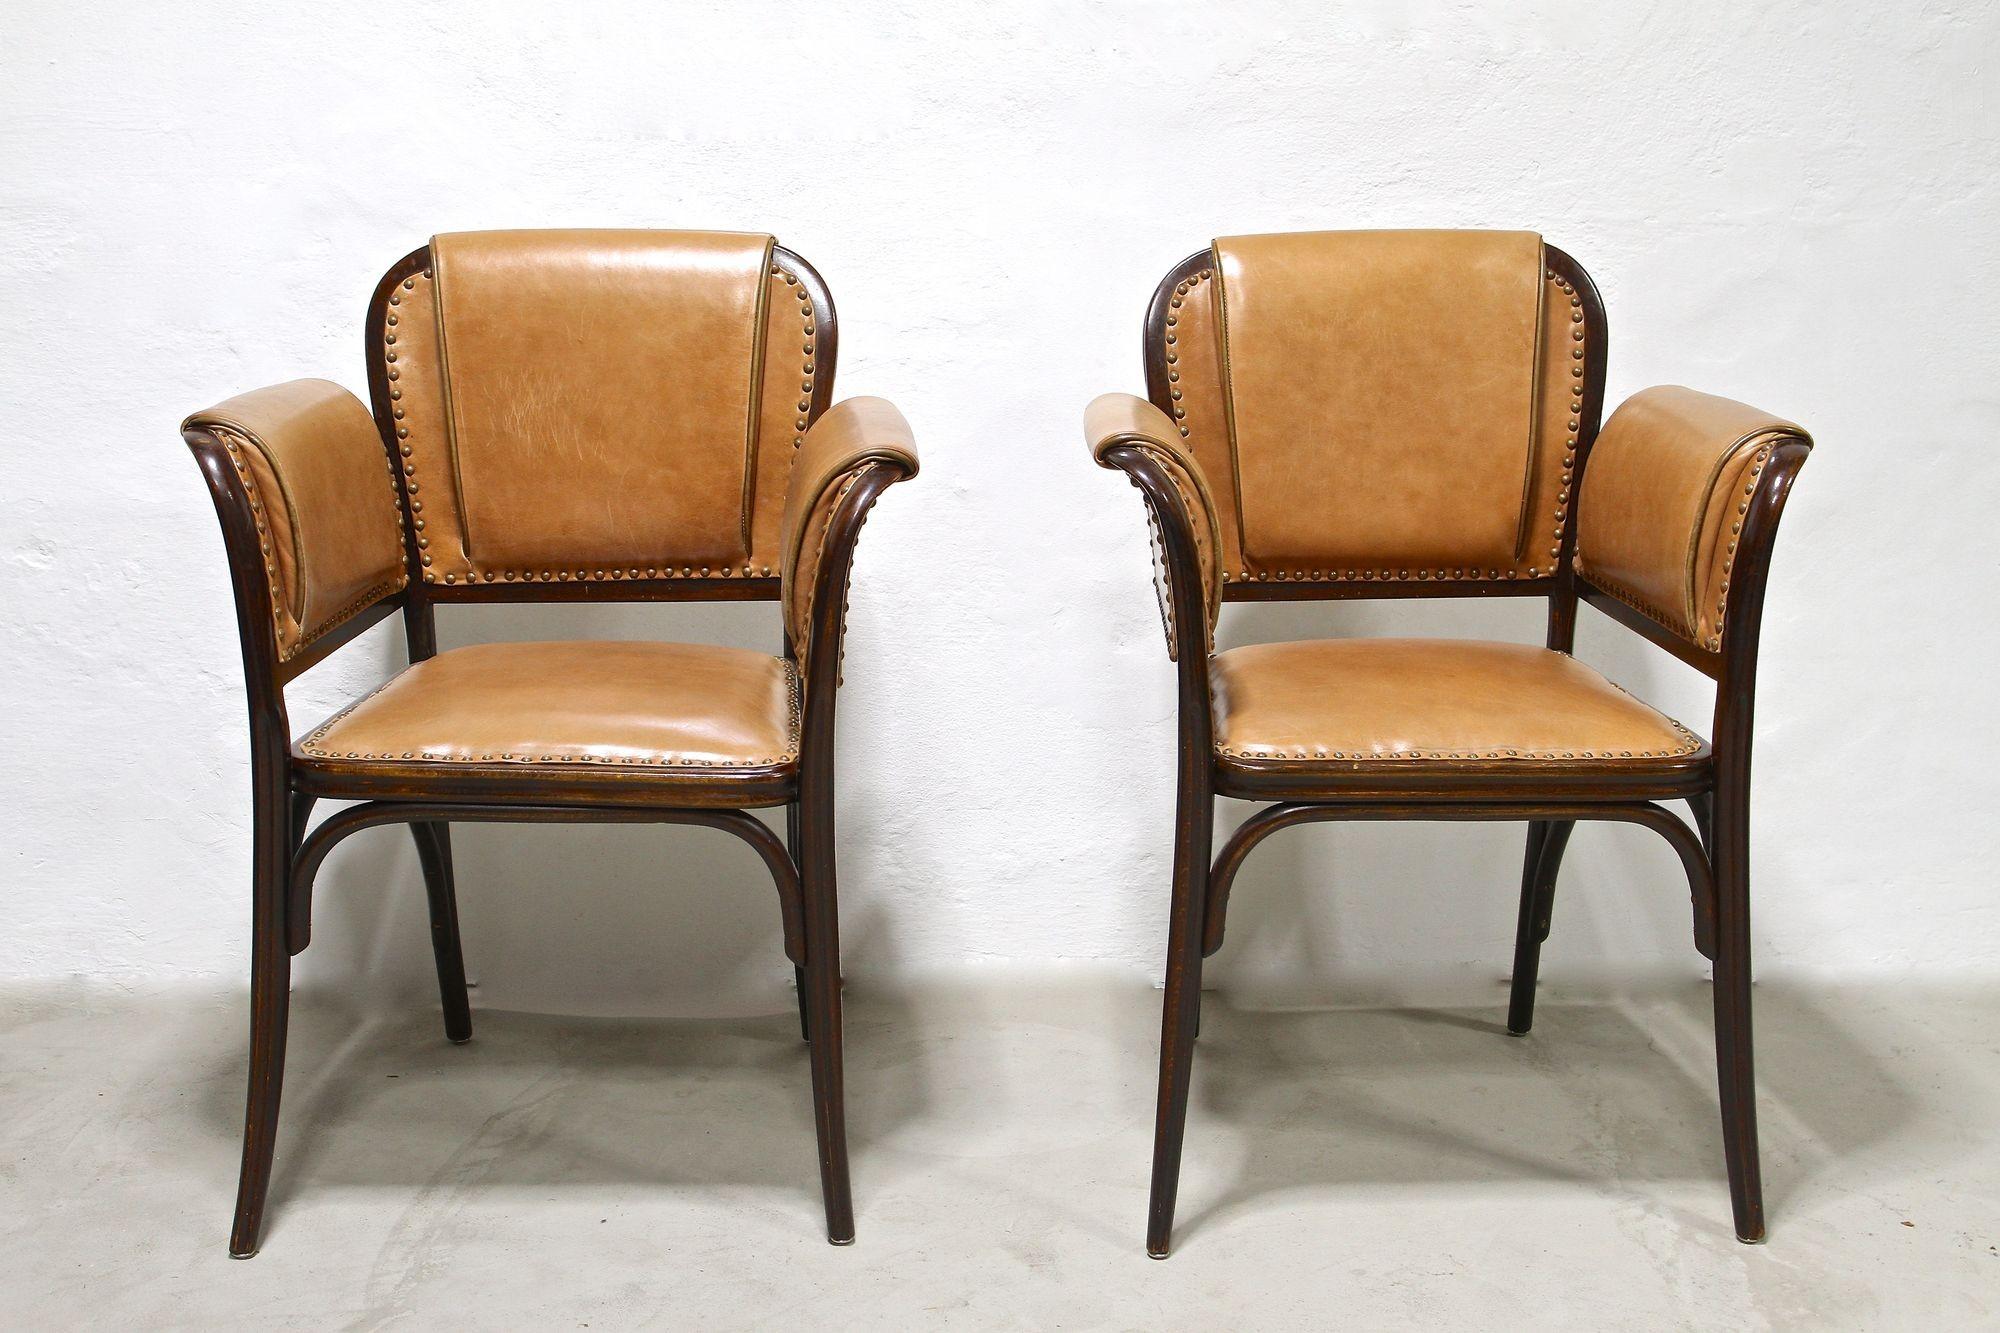 Absolutely rare pair of Art Nouveau bentwood armchairs from the period around 1904. Impressing with its amazing shaped lines, these elaborately crafted early 20th century armchairs were produced by the world renowed company of THONET Vienna - the